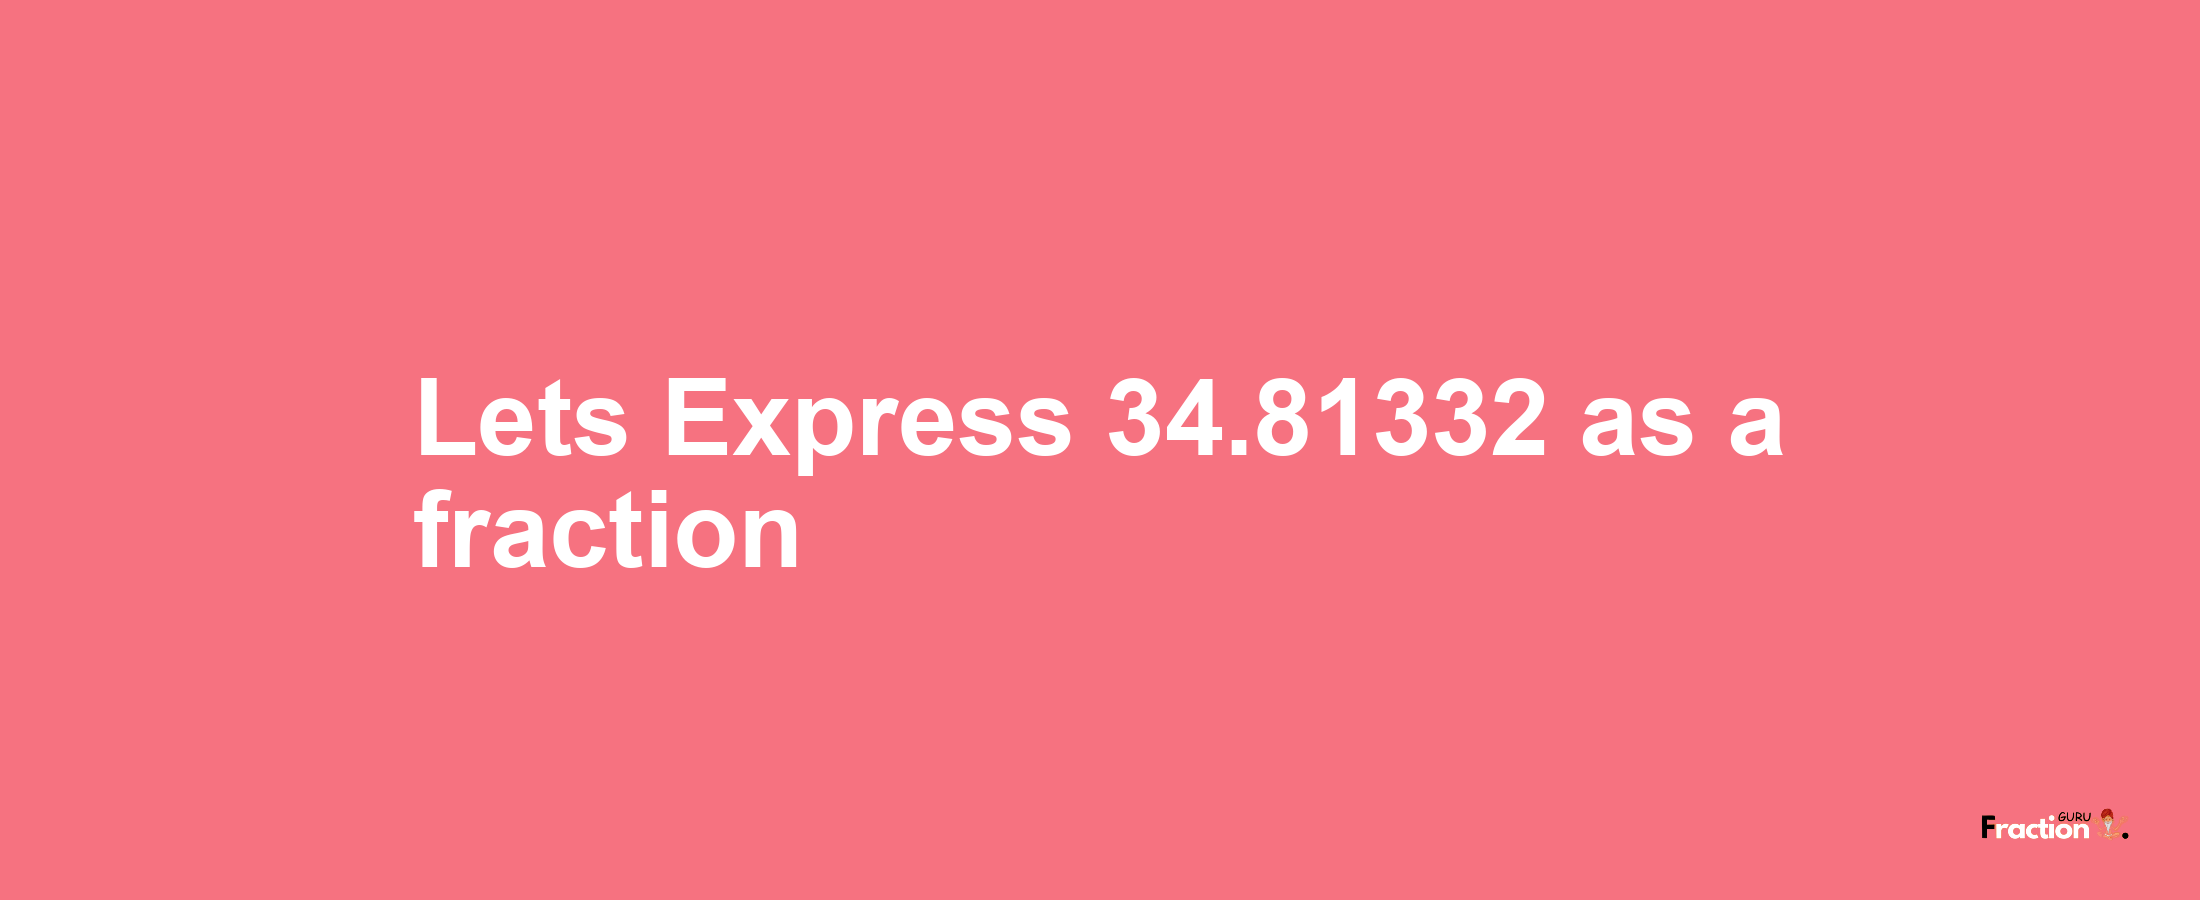 Lets Express 34.81332 as afraction